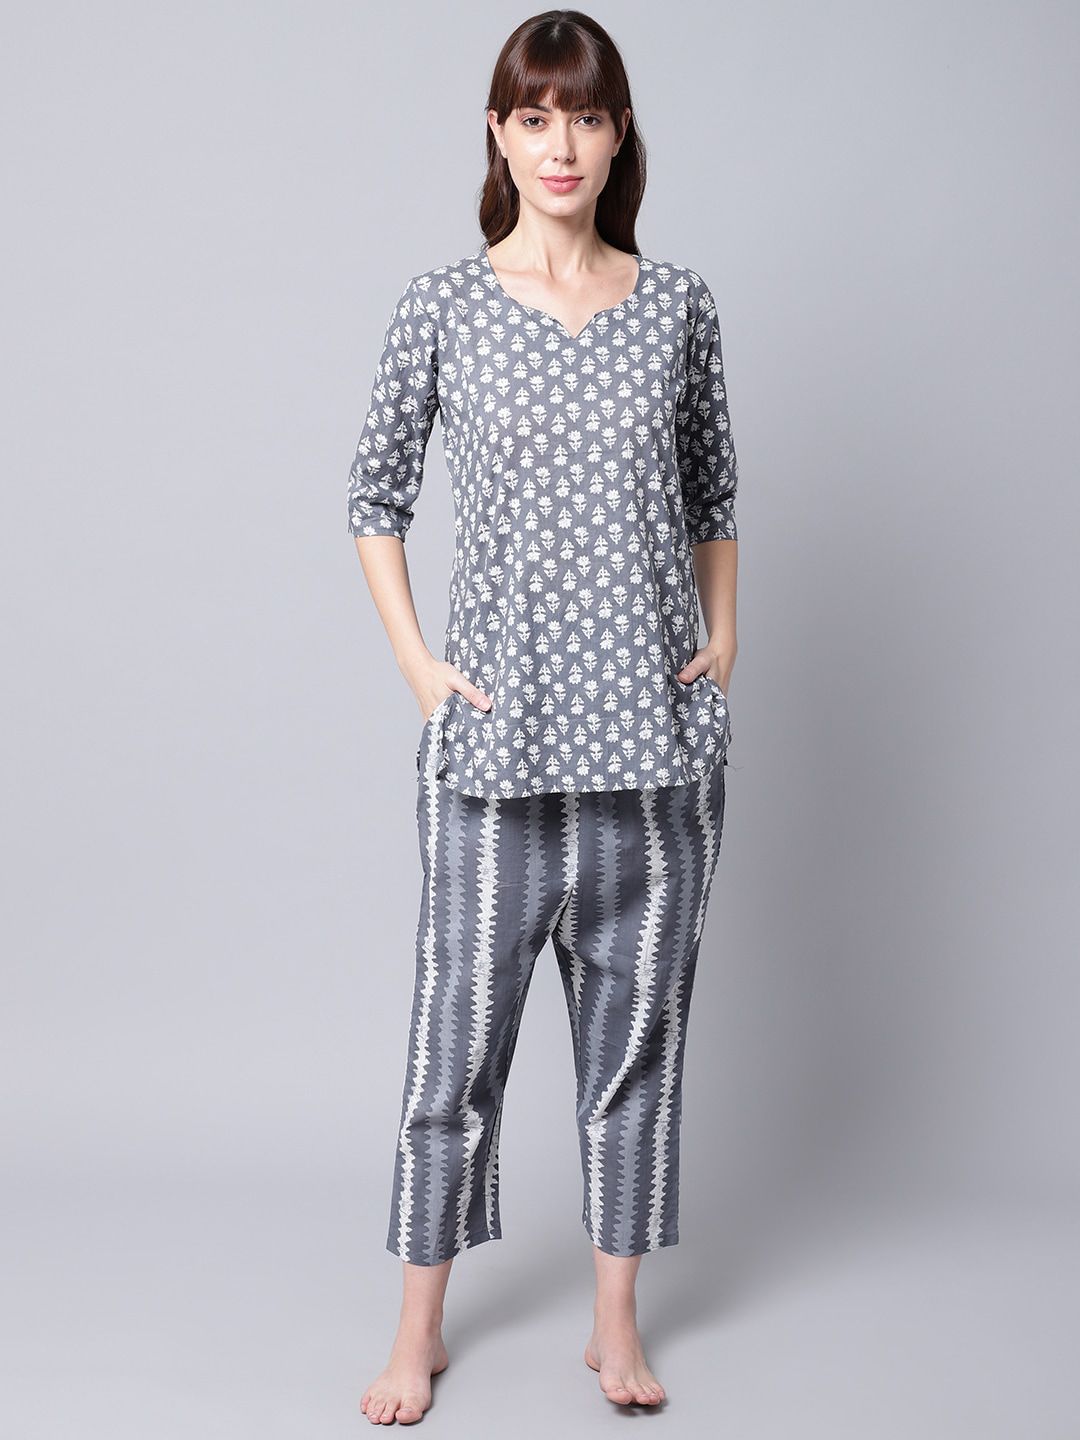 TAG 7 Women Grey & White Printed Pure Cotton Night Suit Price in India